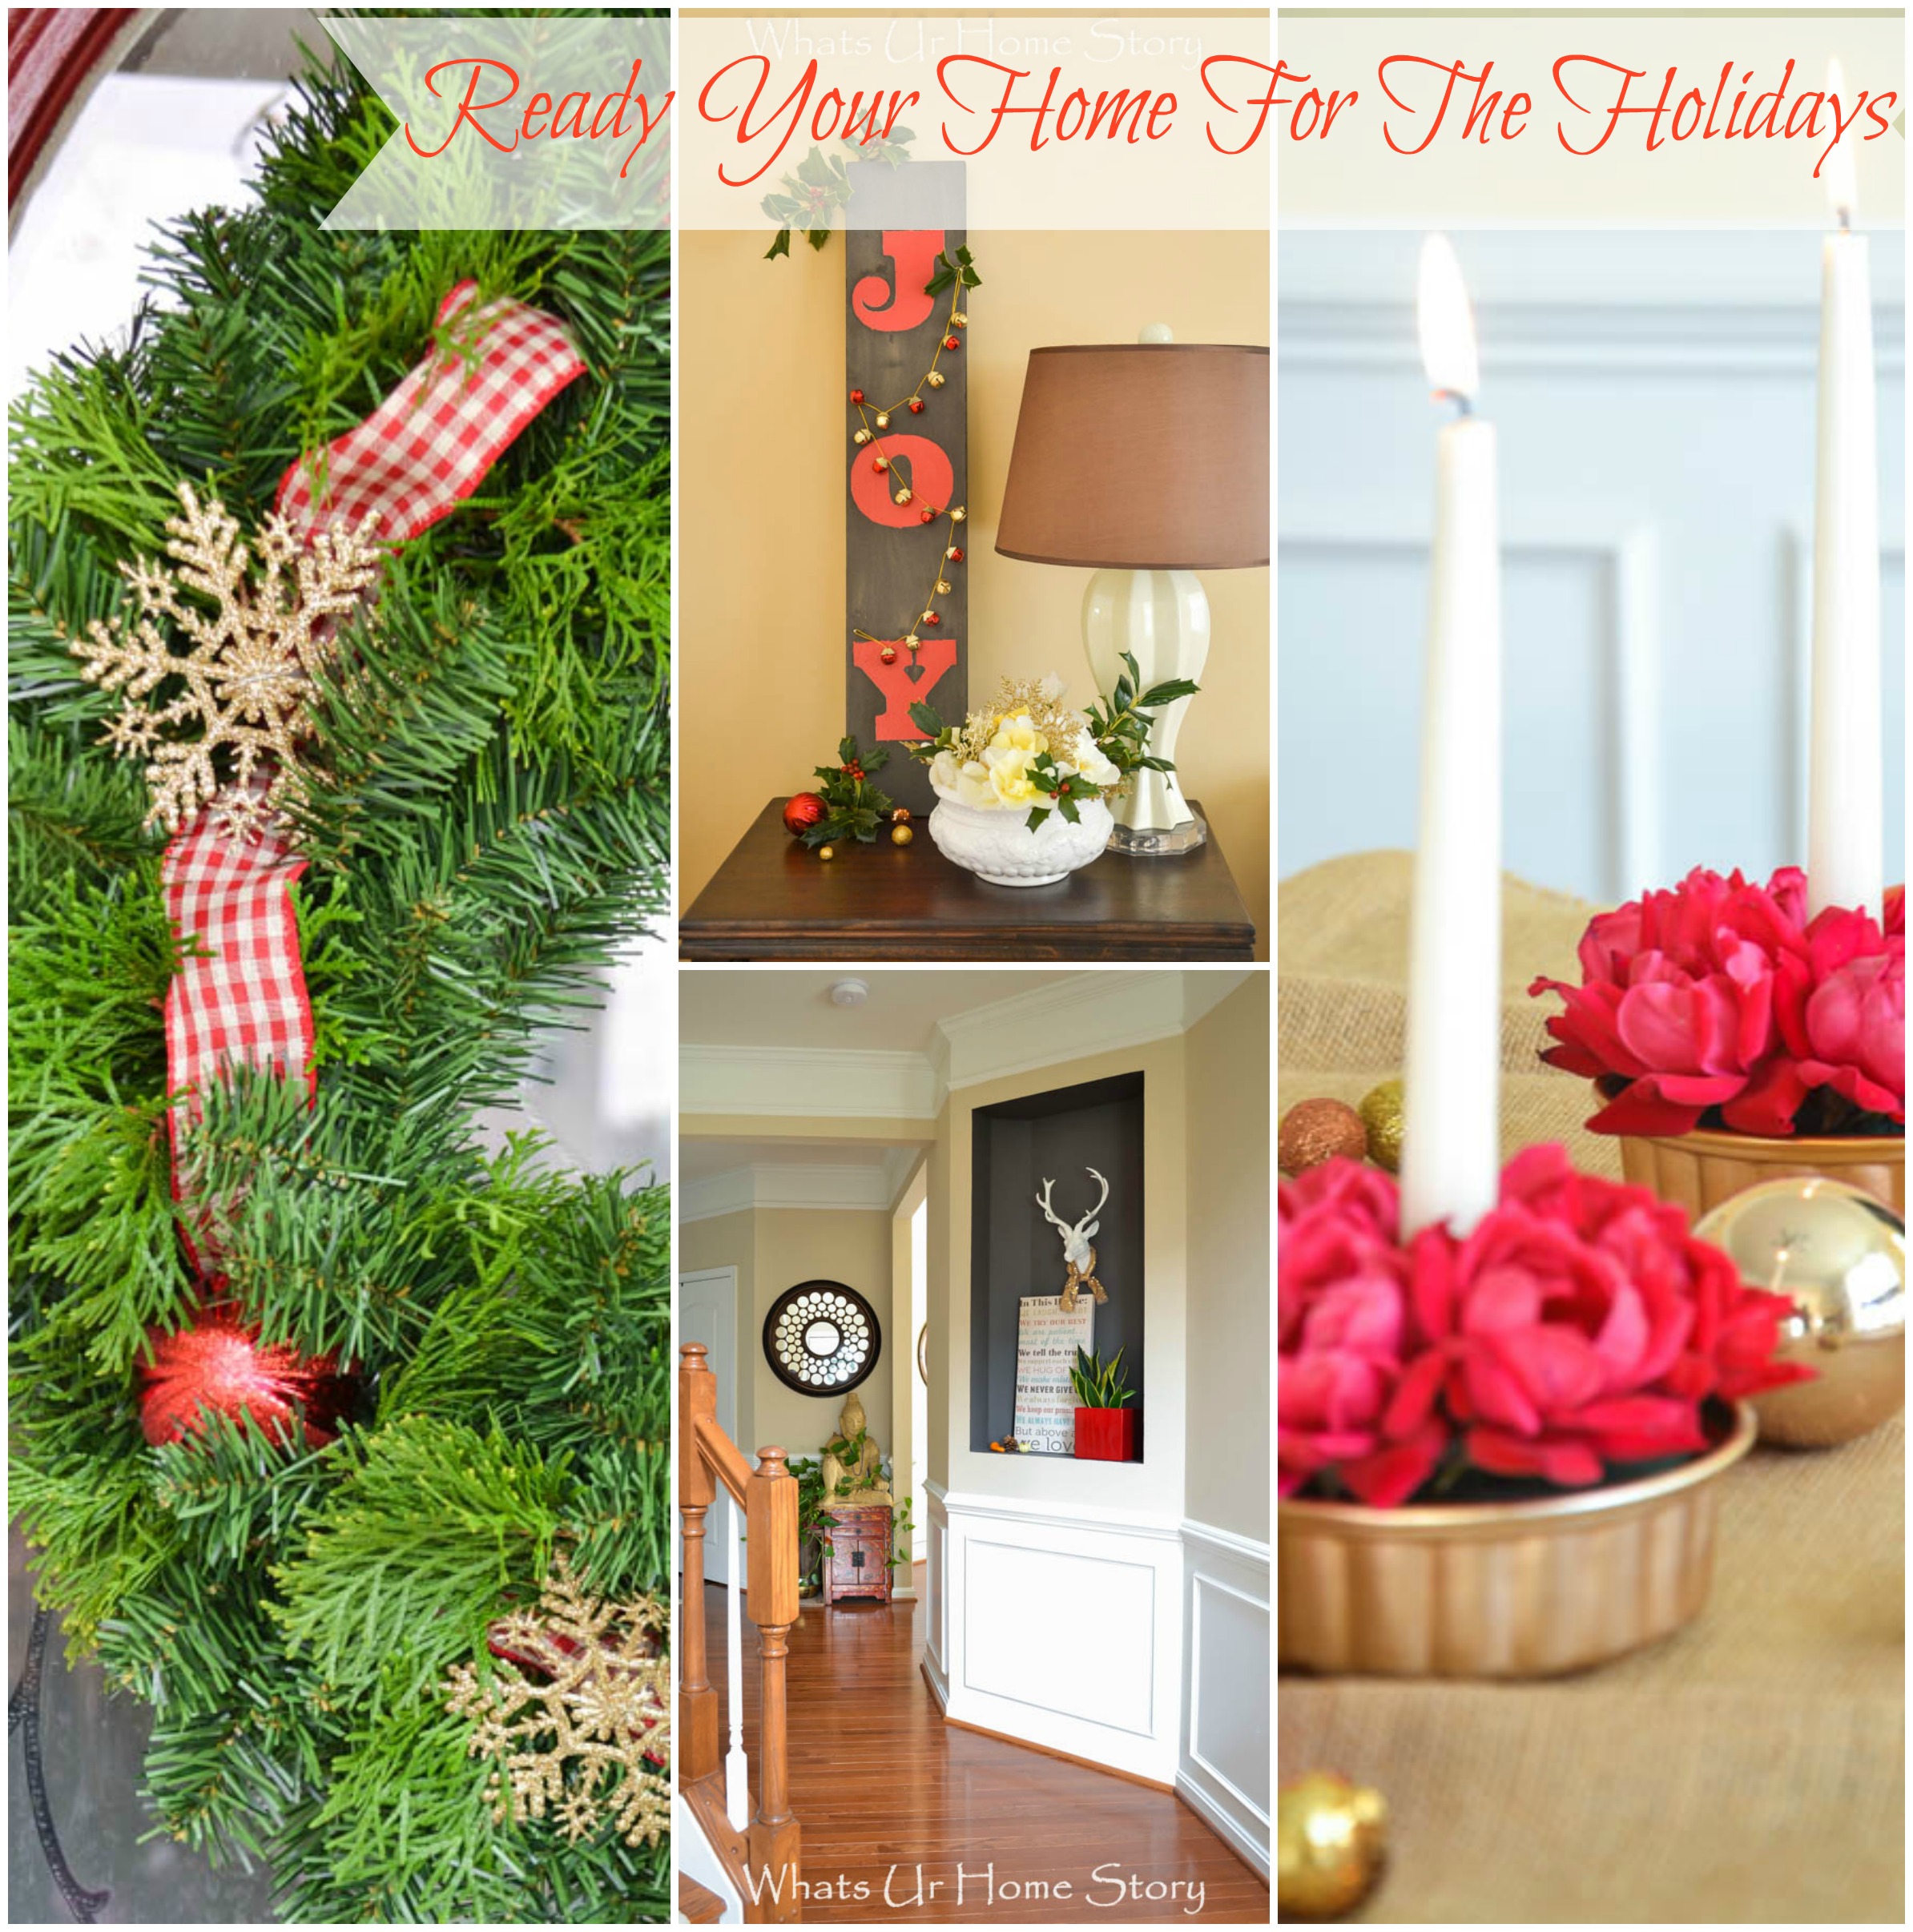 Tips to get your home ready for the holidays